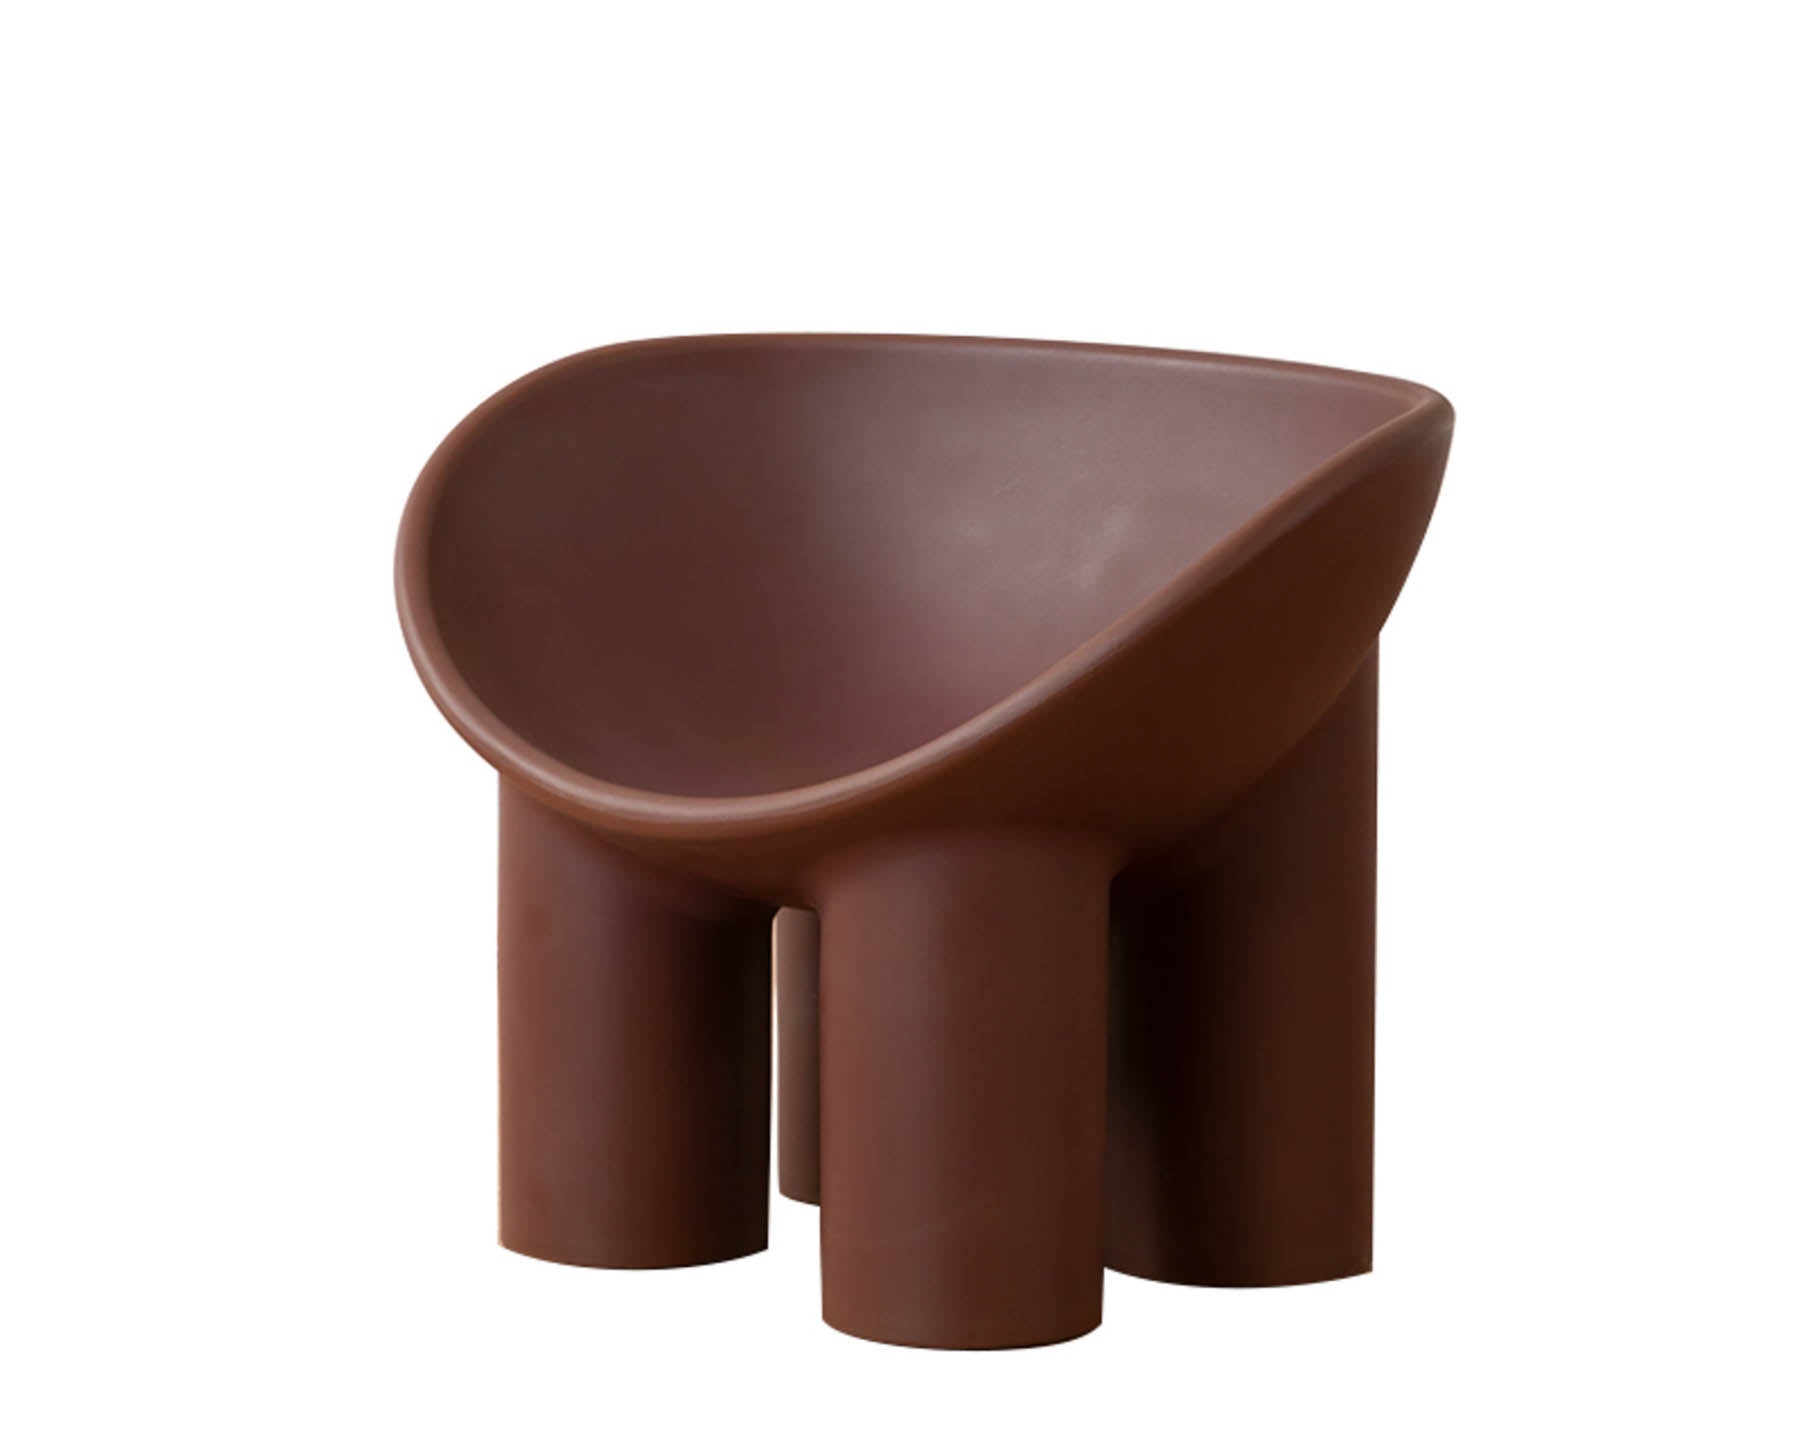 Replica Roly Poly Chair - Brown